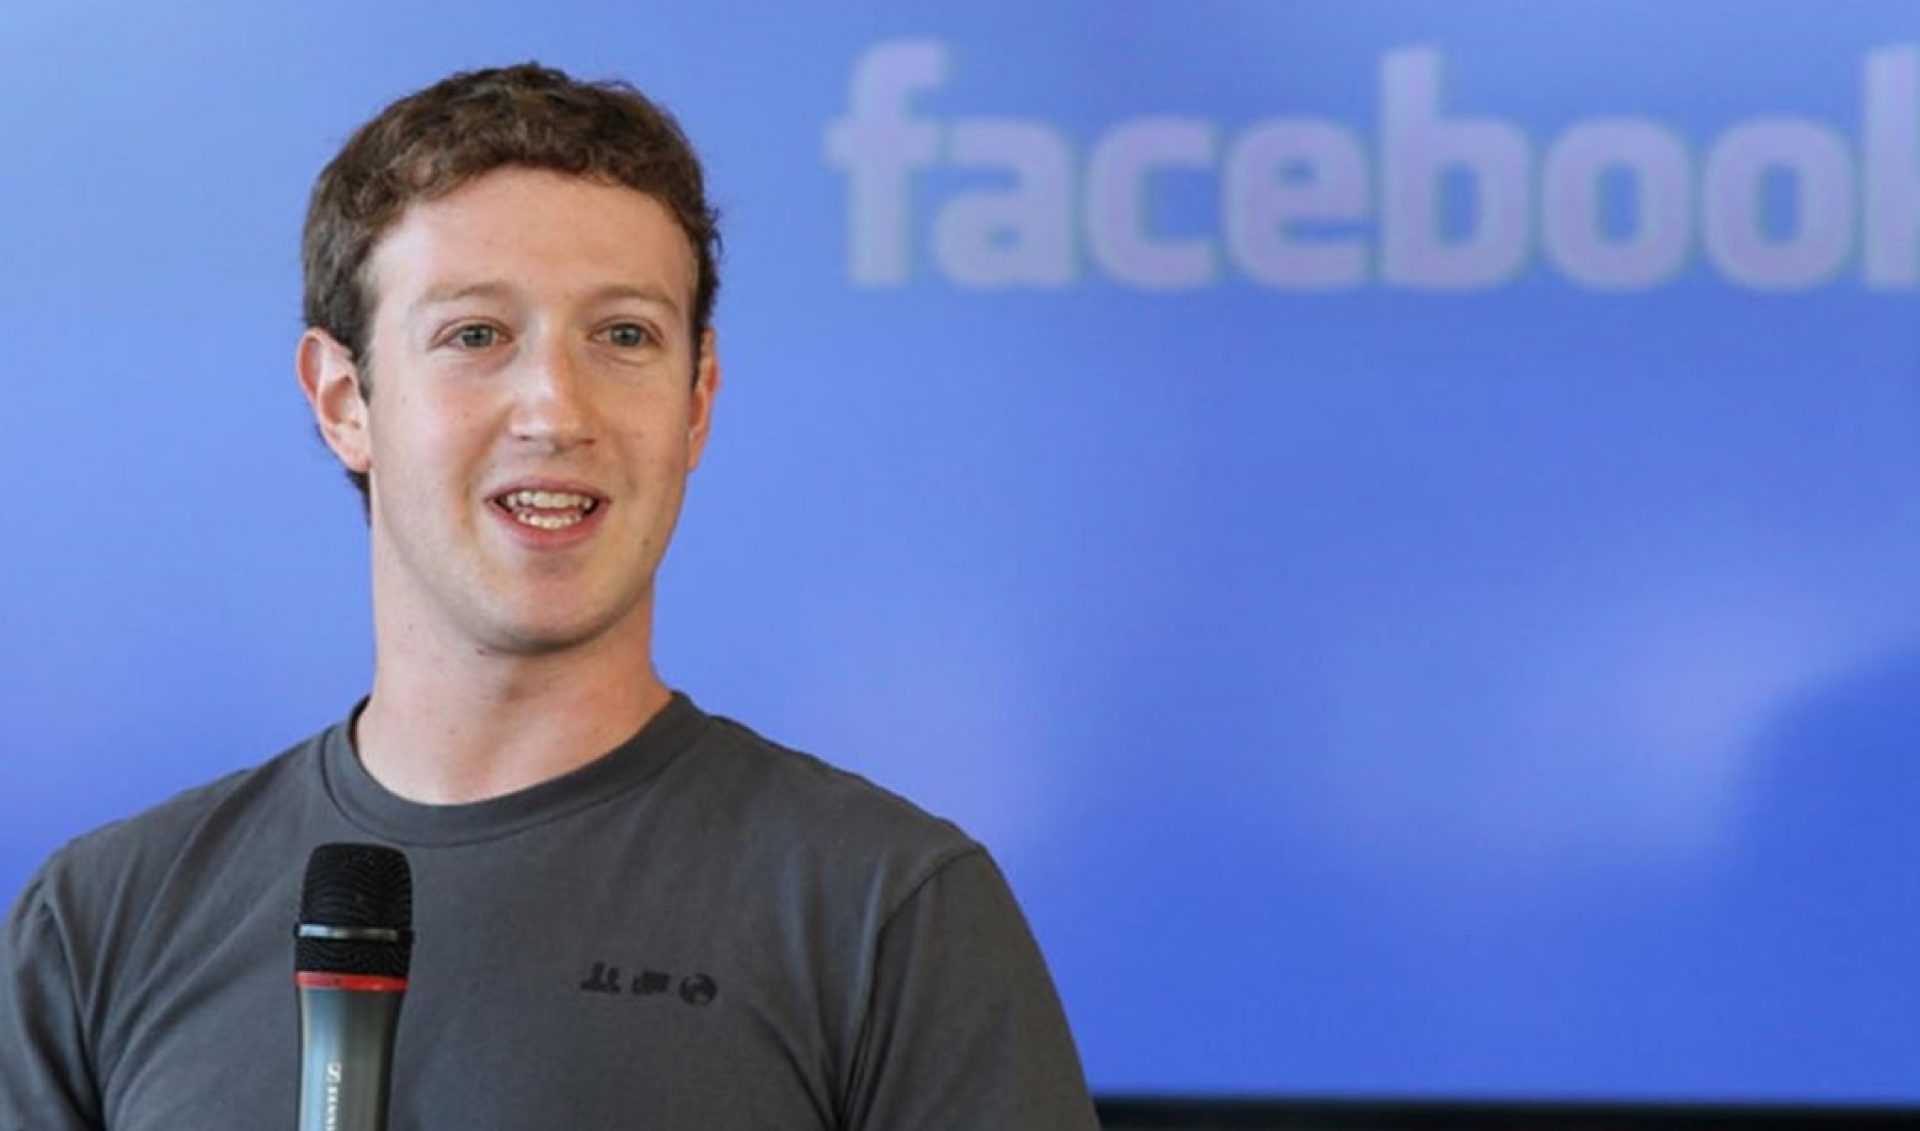 Facebook To Sell Video Ads For Third Party Websites And Apps Like ‘Daily Mail’ And ‘USA Today’